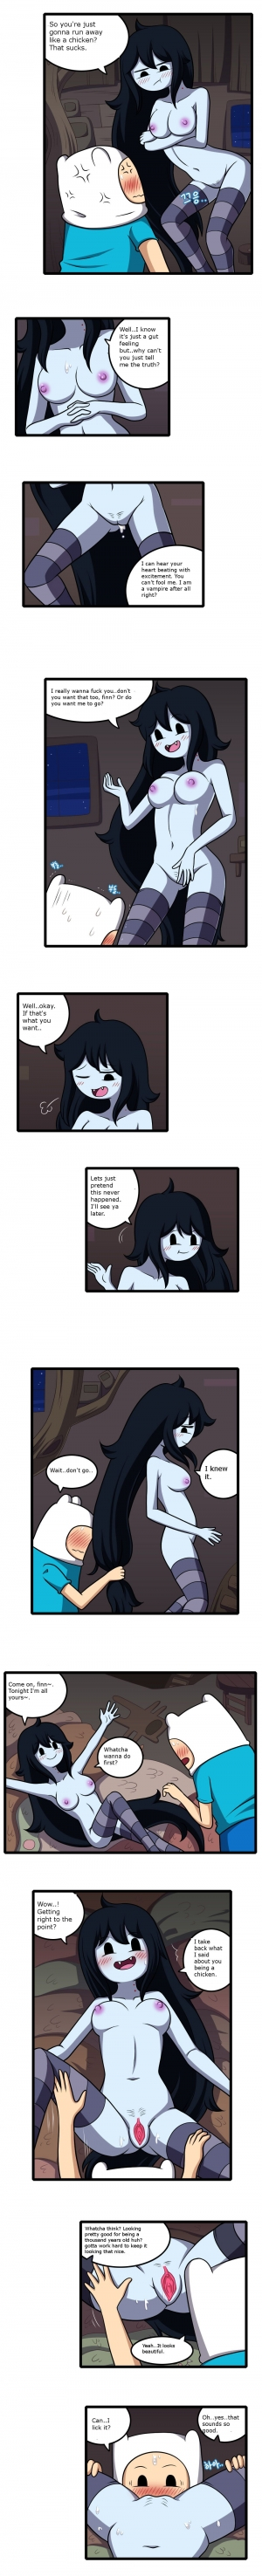 [WB] Adult Time 4 (Adventure Time) (English) [incomplete] - Page 6